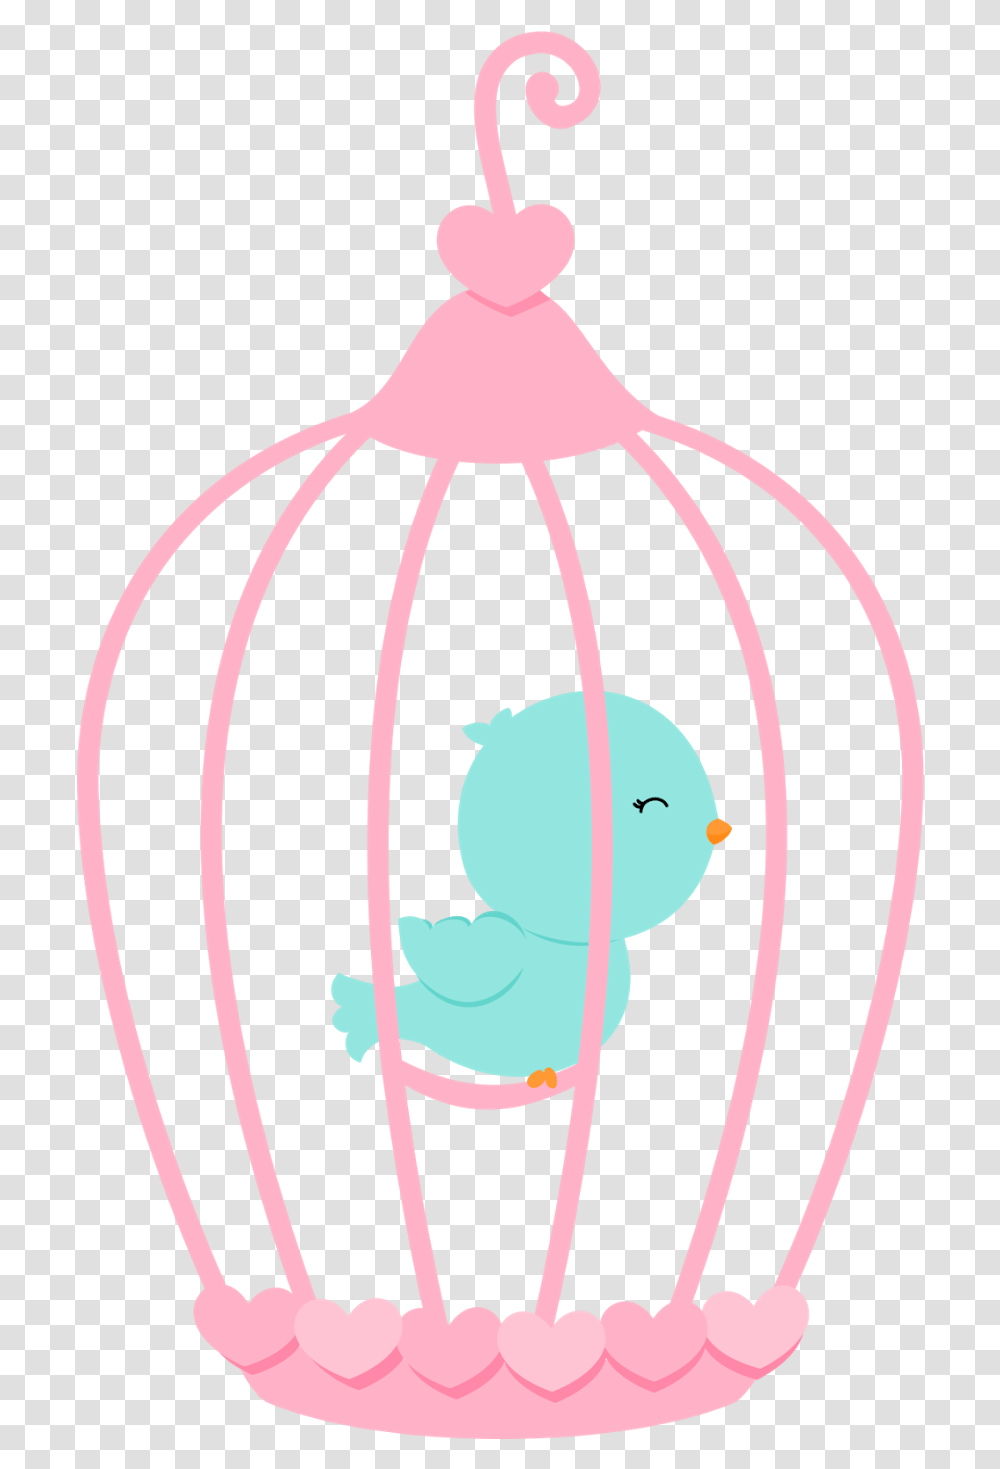 Bird Cage Free Machine Embroidery Designs Love Birds Birds In Its Cage Cartoon, Pattern, Furniture Transparent Png